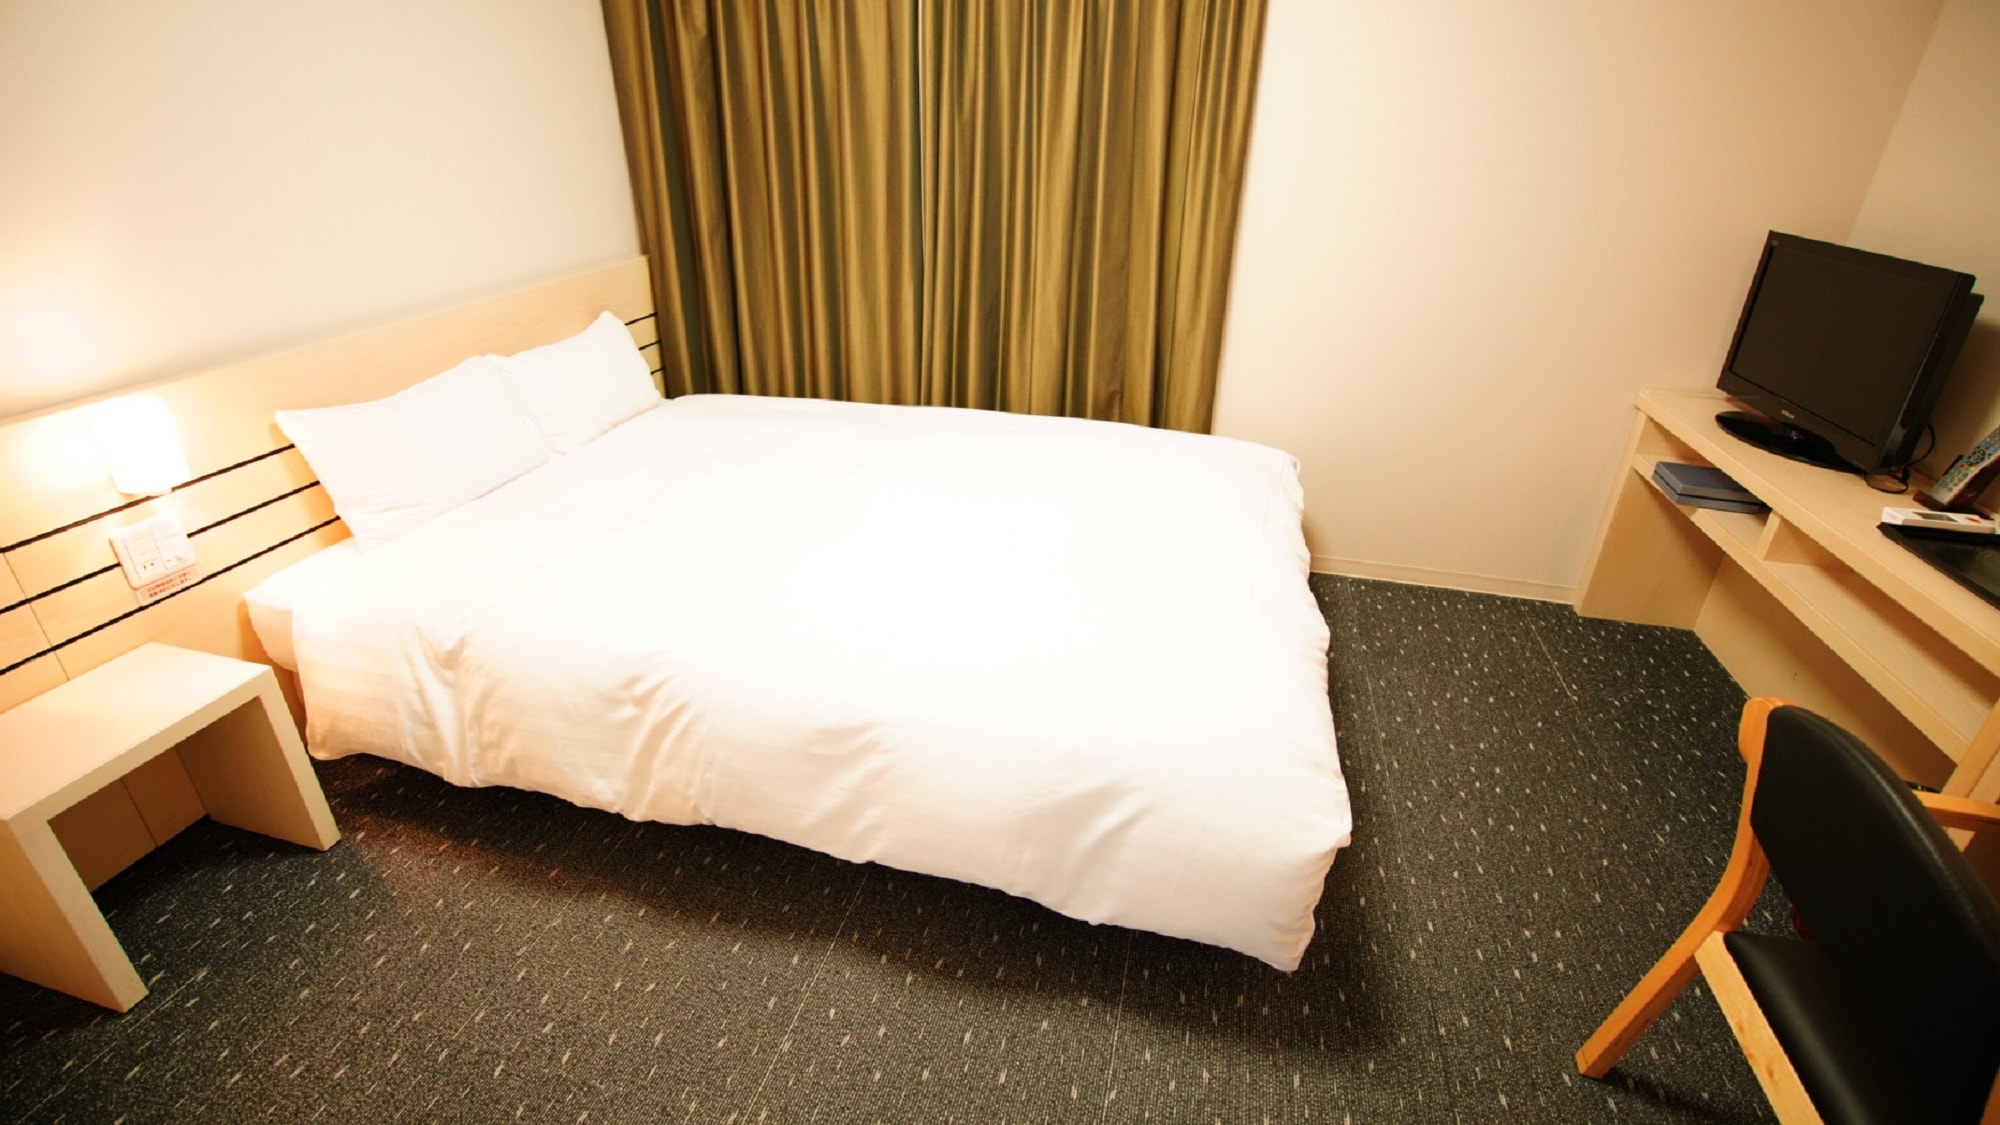 ◆ Double room 18.0㎡ Bed size: 140cm & times; 195cm